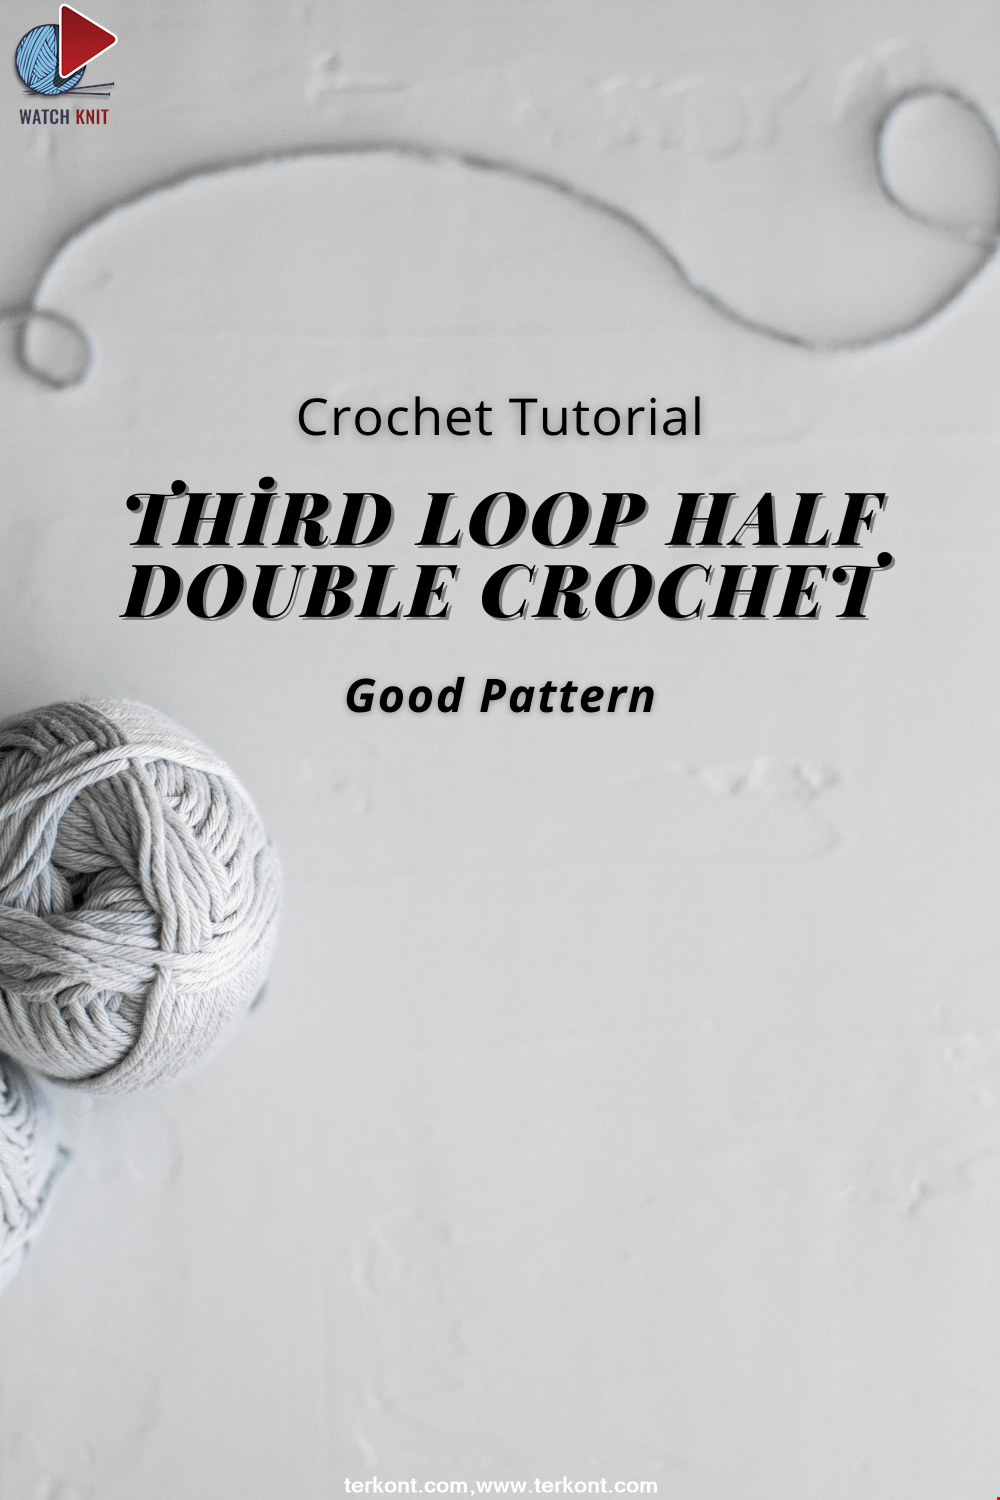 Crochet Tutorial and Pattern <3